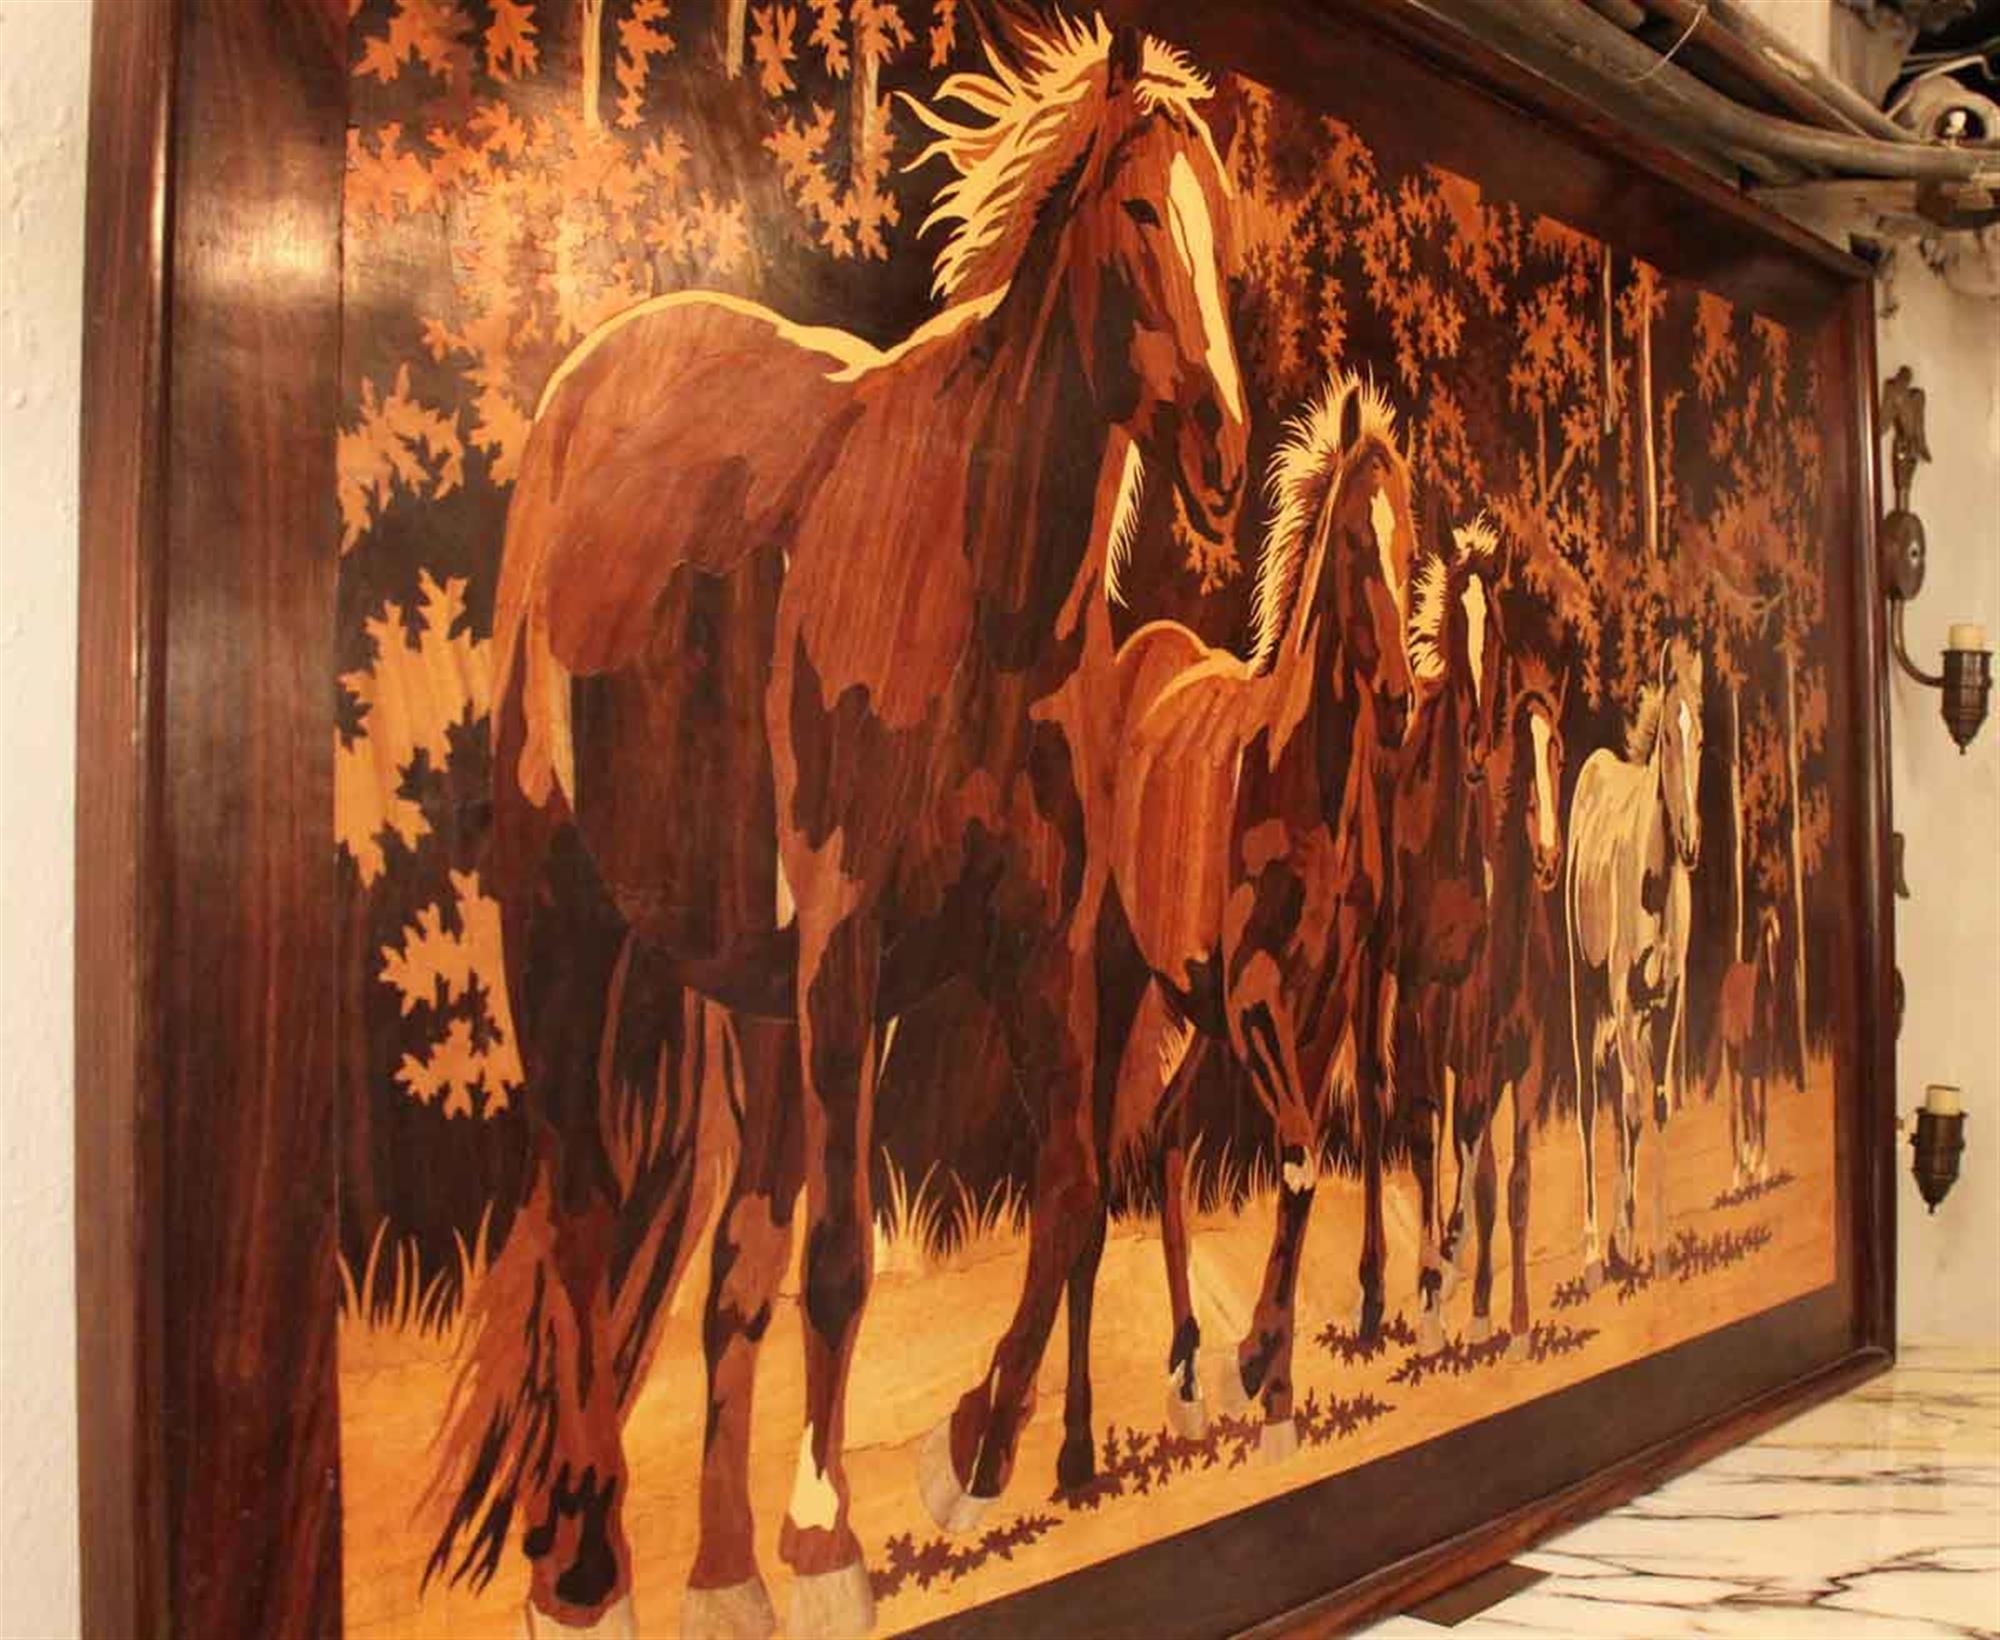 Framed 1980s wood inlay work of horses. This can be seen at our 2420 Broadway location on the upper west side in Manhattan.